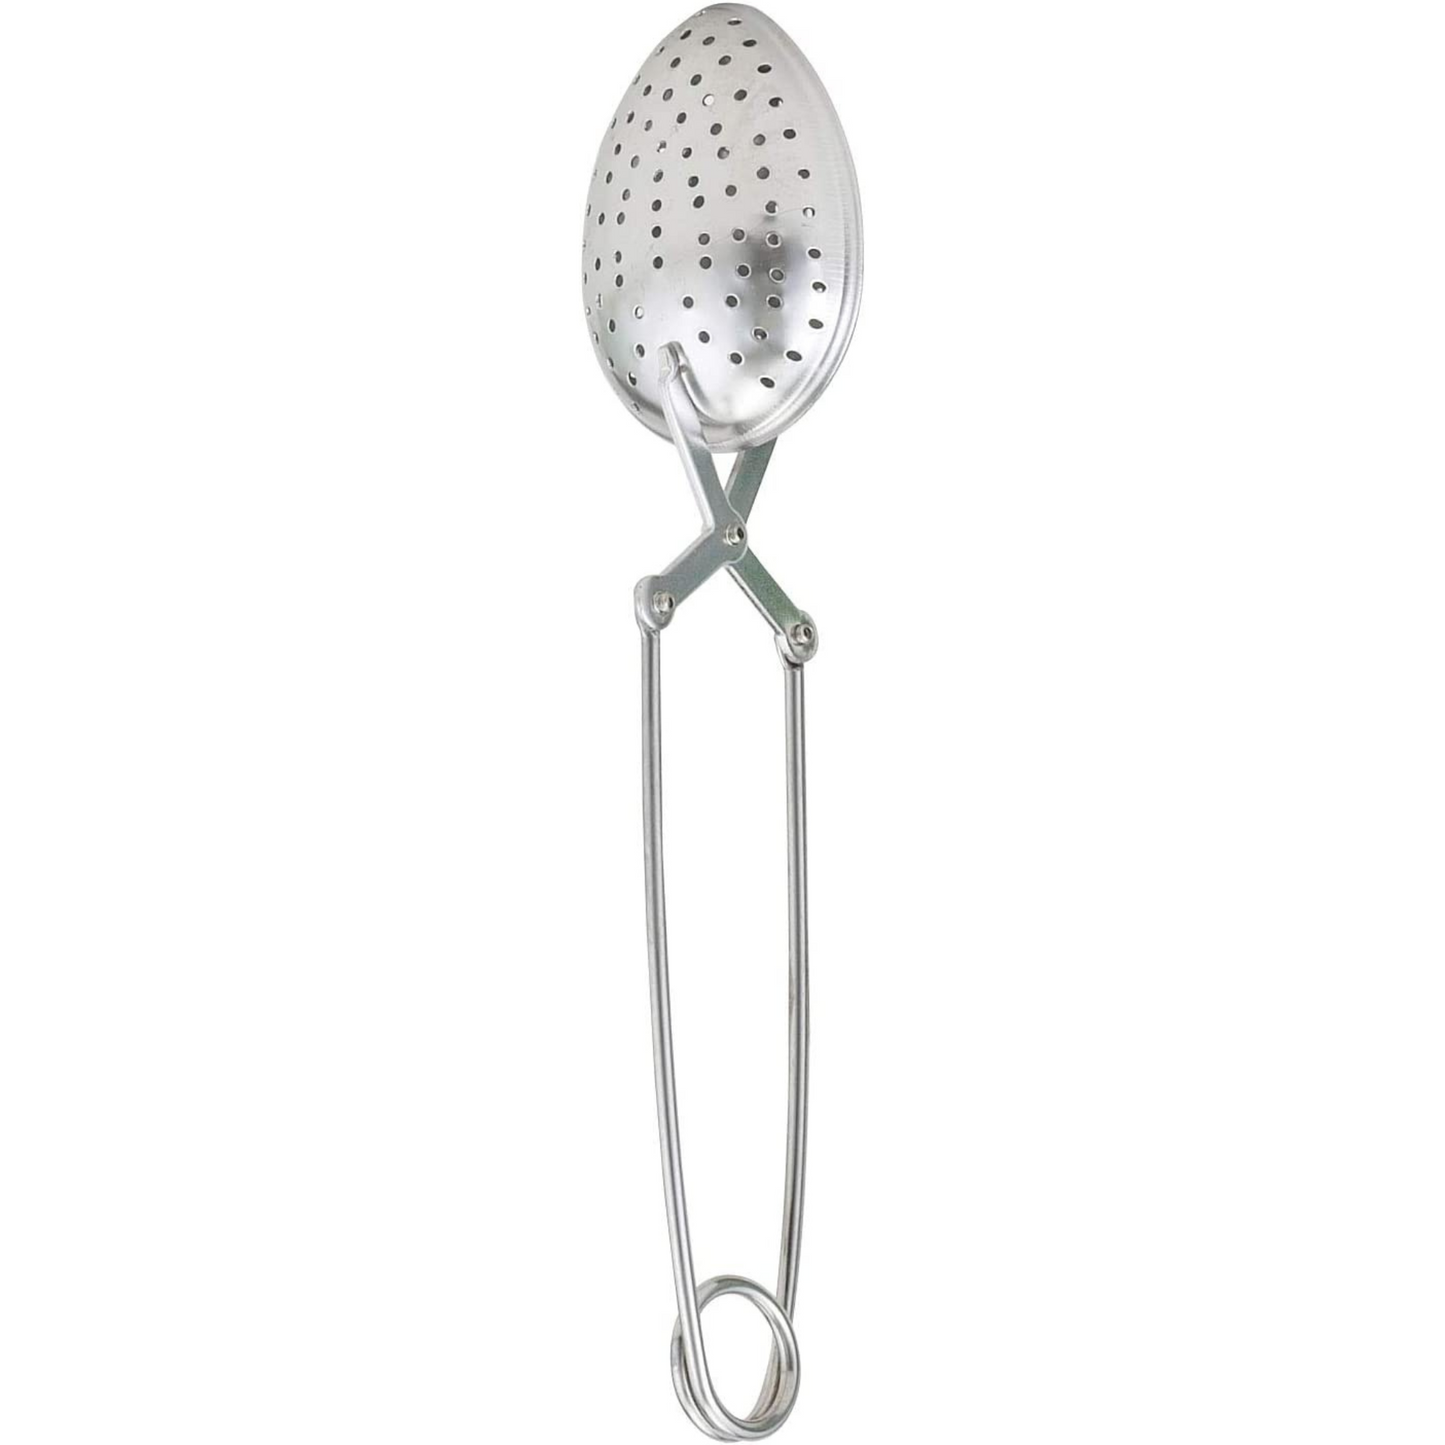 Primary Image of Lund Tea Infuser Spoon